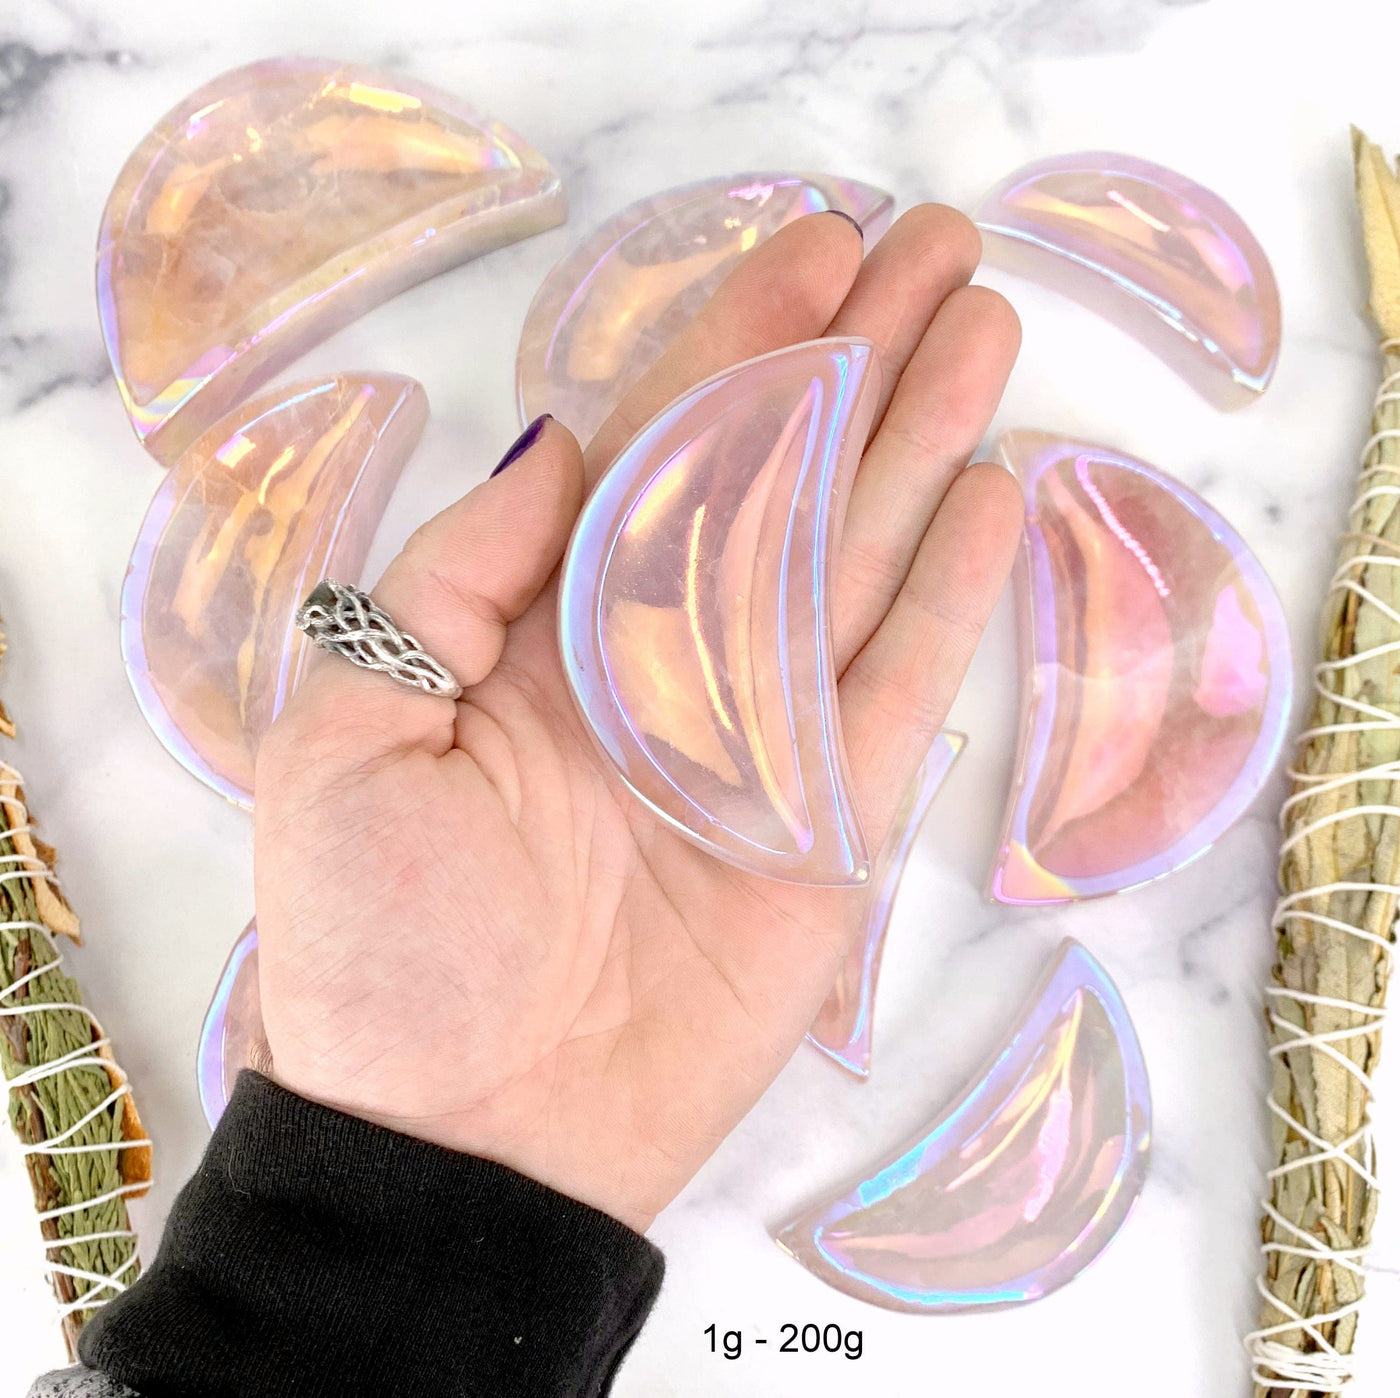 one 1gram - 200gram angel aura moon bowl in hand with marble background for size reference